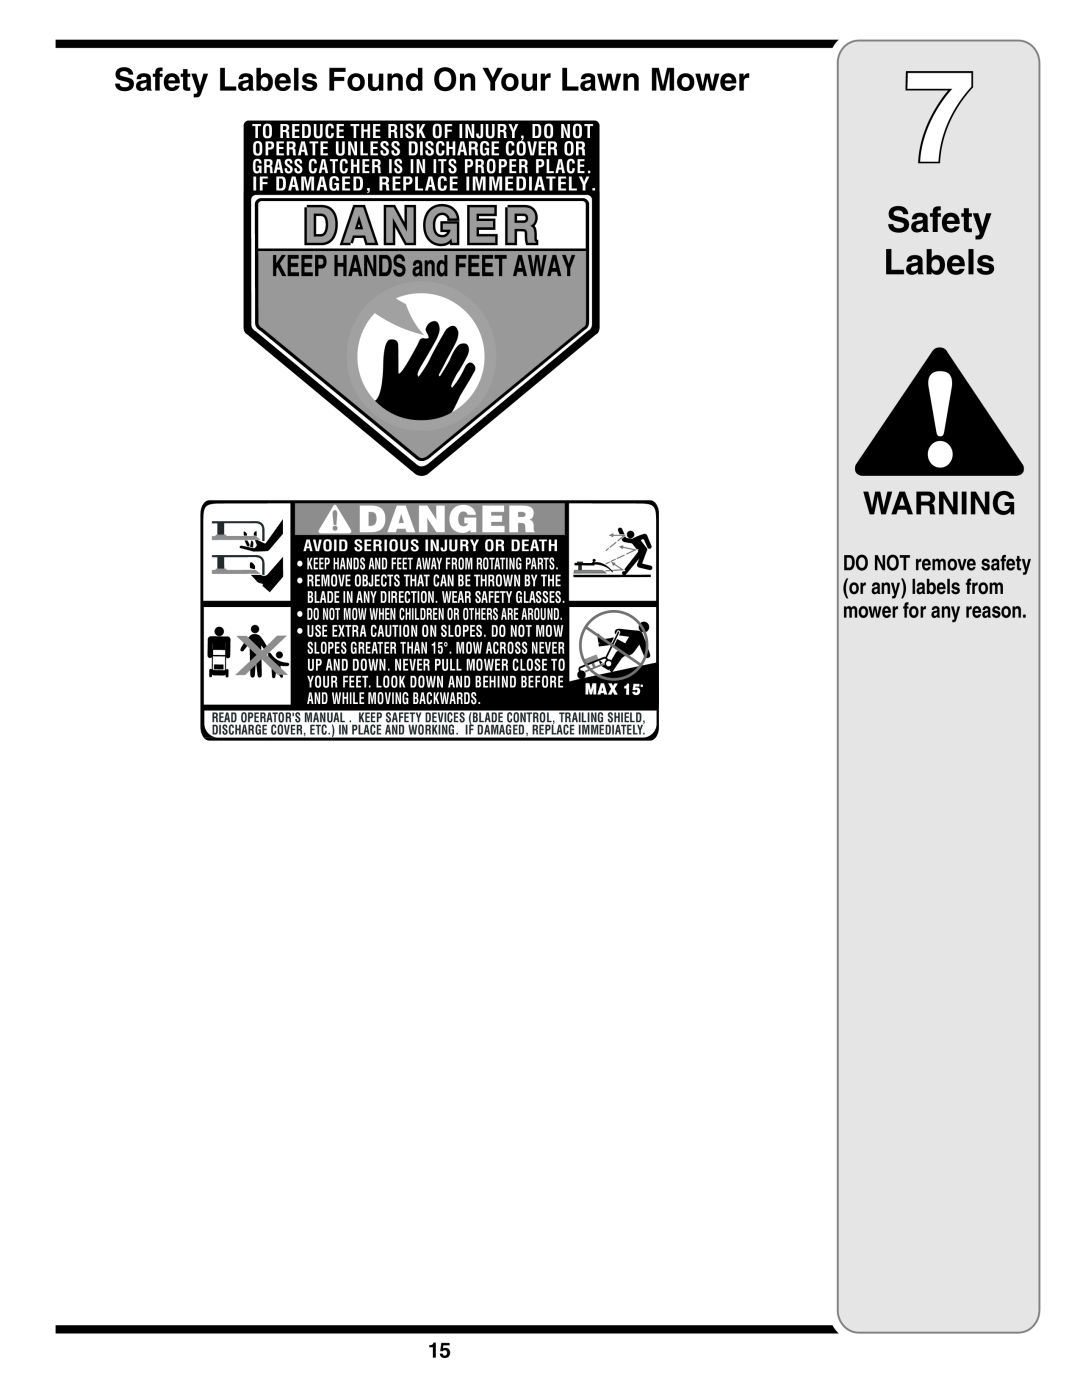 MTD 838 warranty Safety Labels Found On Your Lawn Mower, DO NOT remove safety or any labels from mower for any reason 